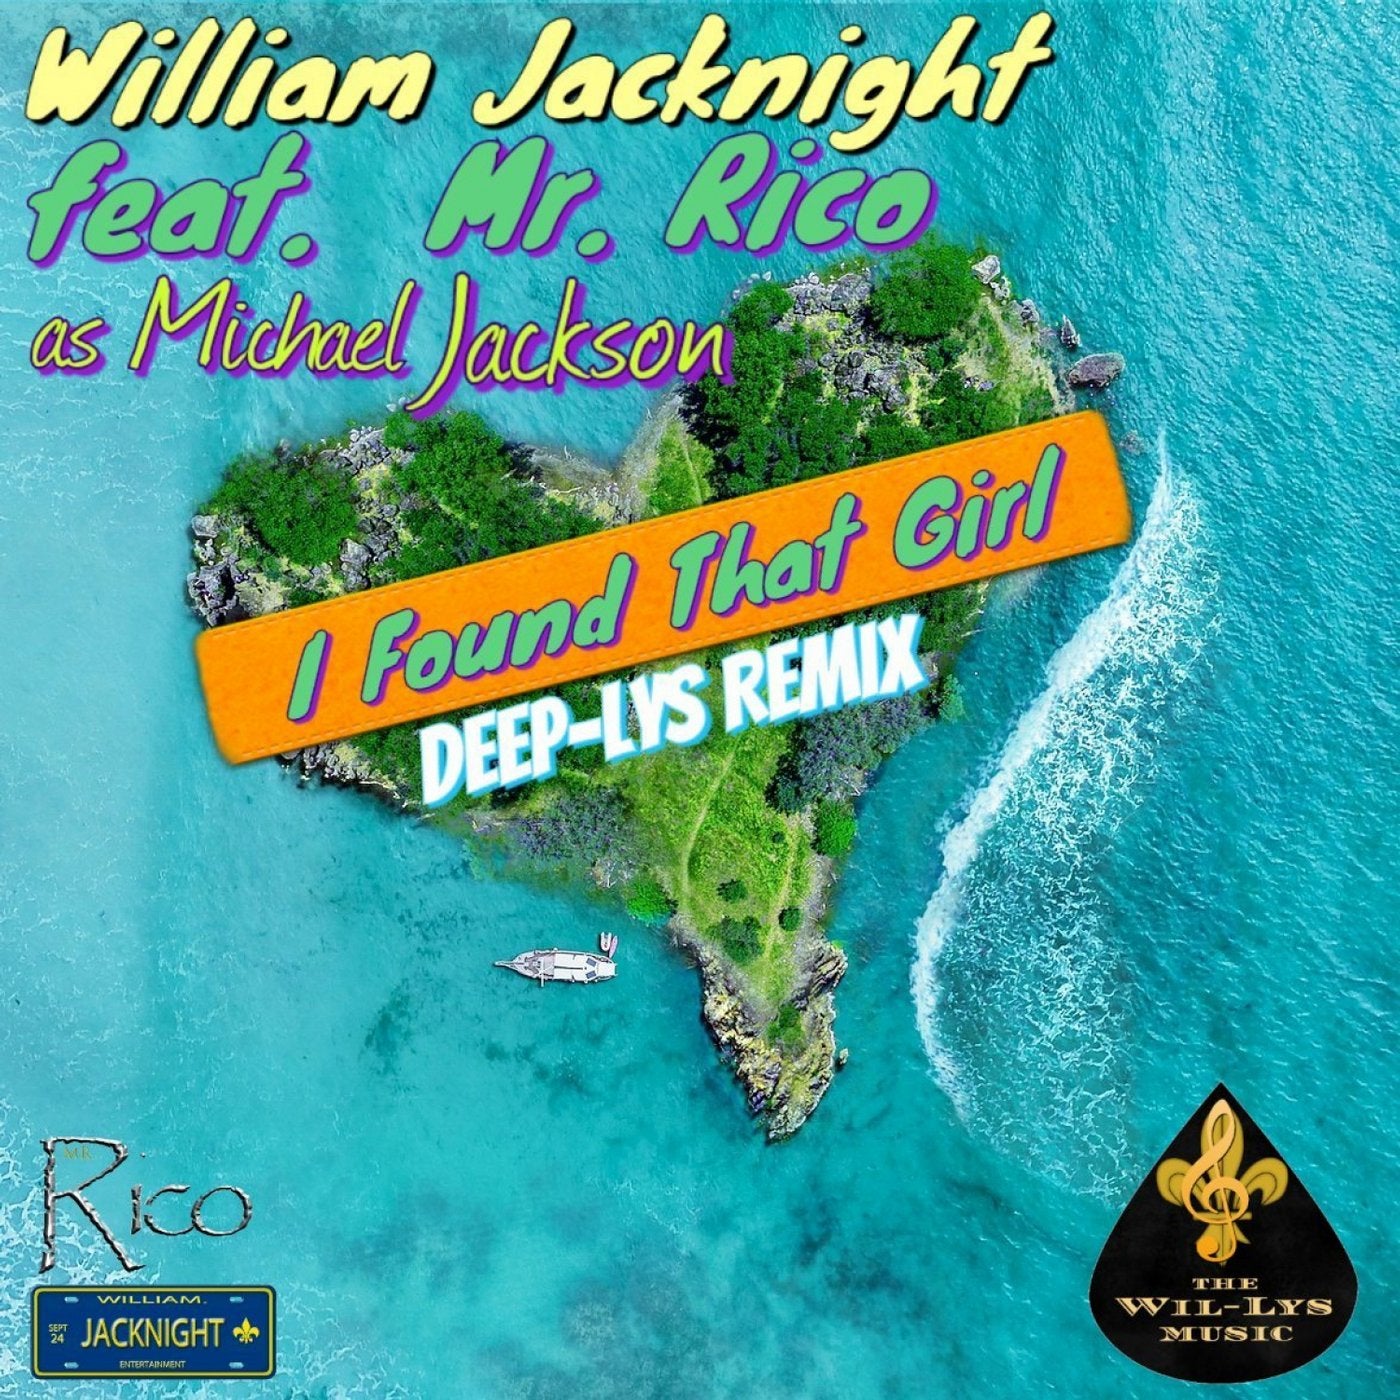 I Found That Girl (feat. Mr Rico as Michael JACKSON & D.J. Will-Knight) [Deep-Lys Remix]